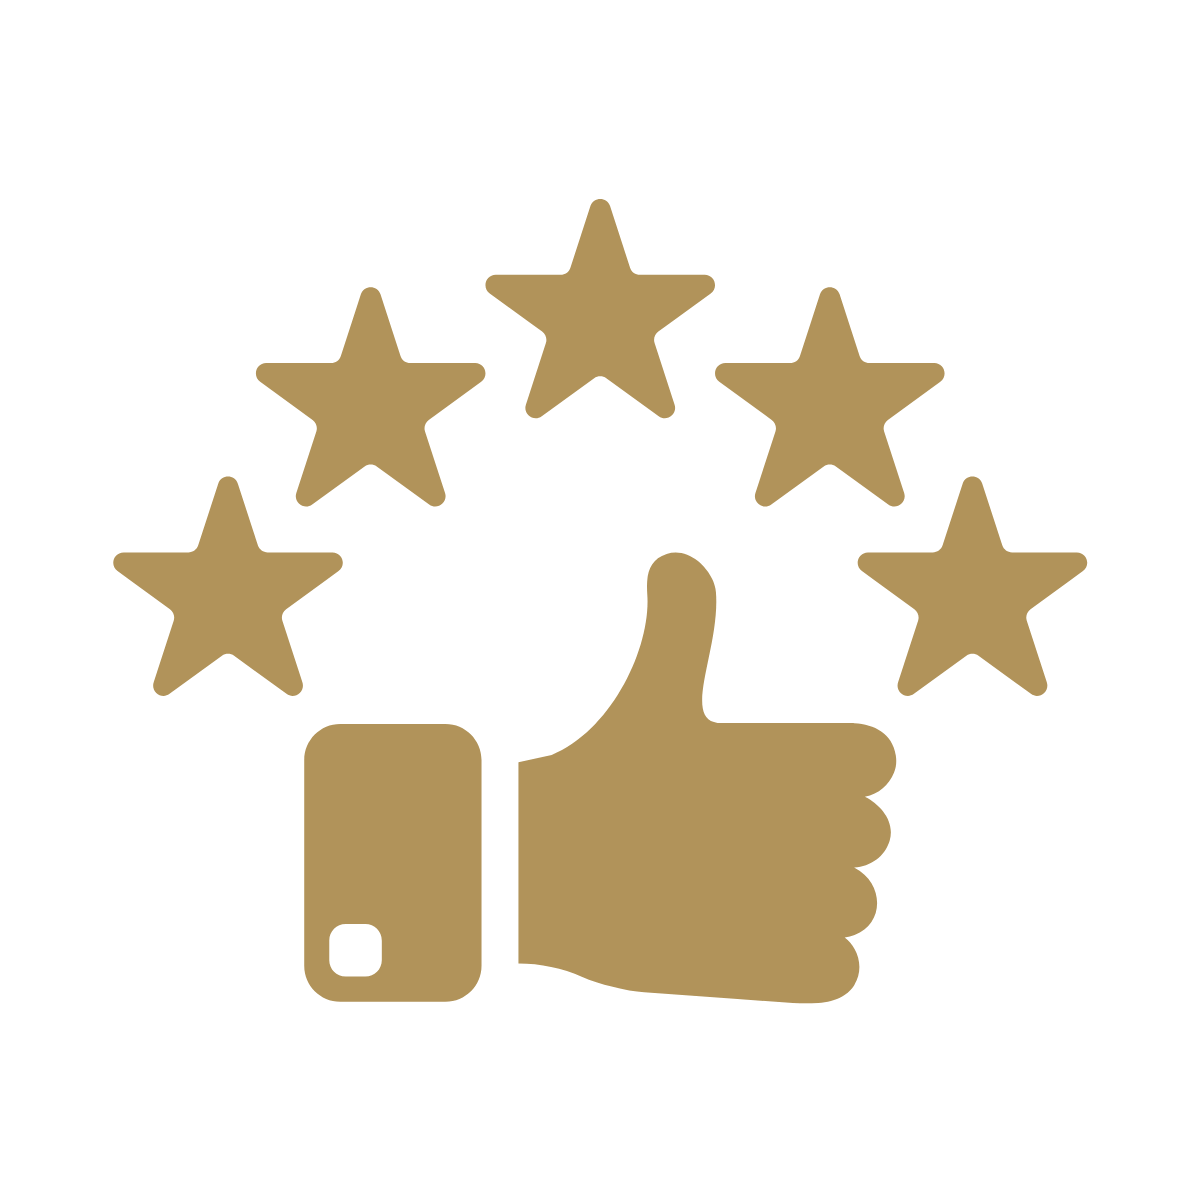 Thumbs up with 5-stars